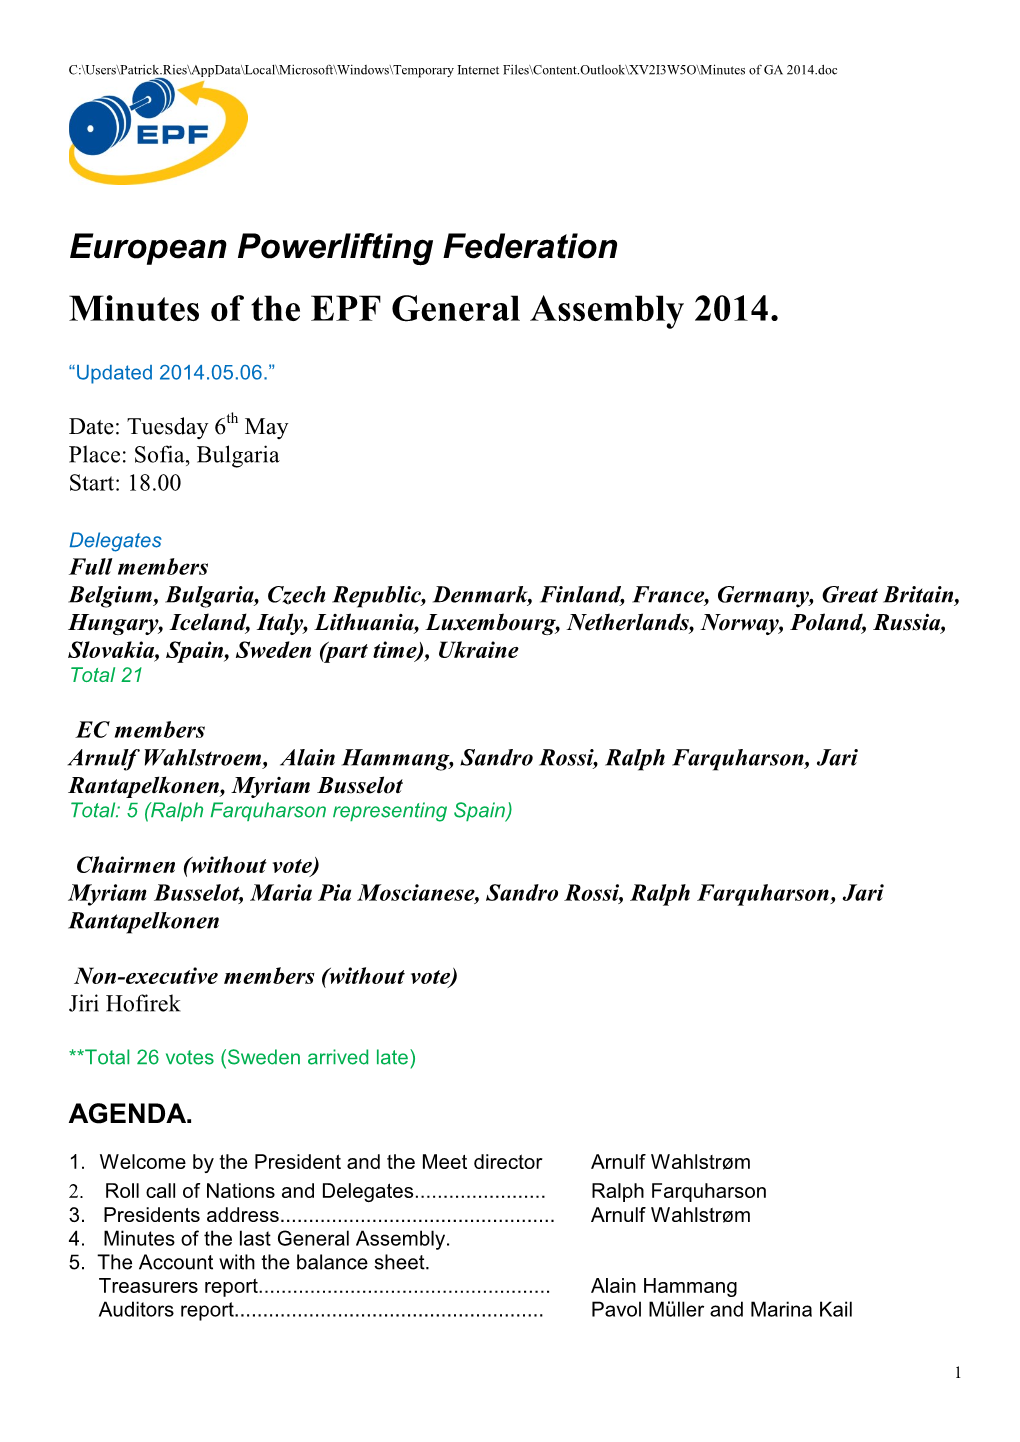 Minutes of the EPF General Assembly 2014